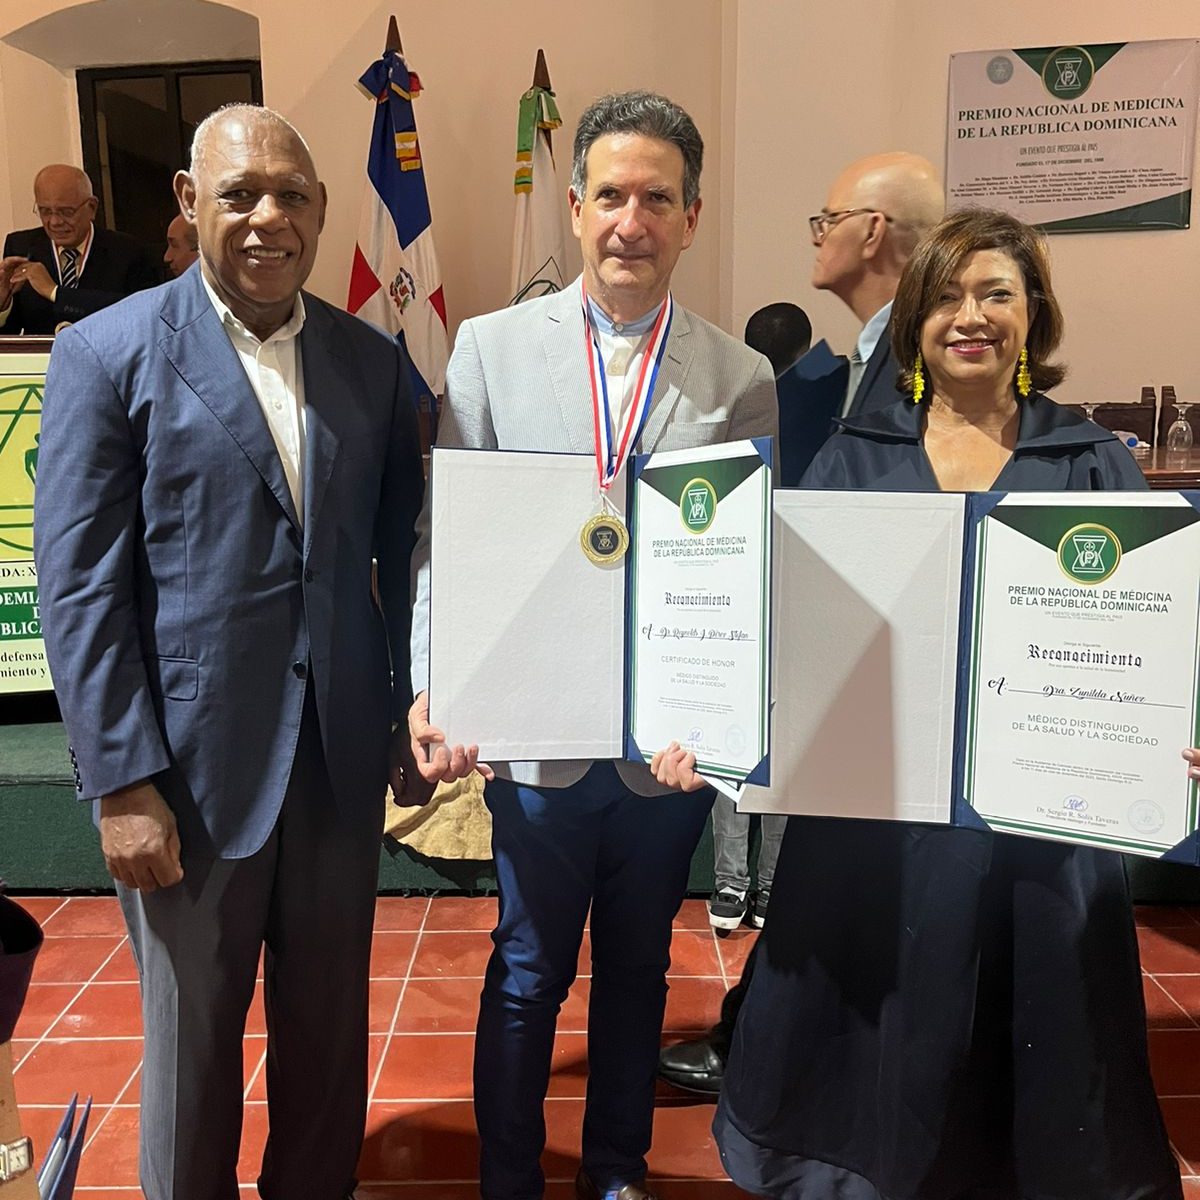 The National Prize for Medicine is awarded to researchers from the Academy of Sciences – El Nuevo Diario (Dominican Republic)